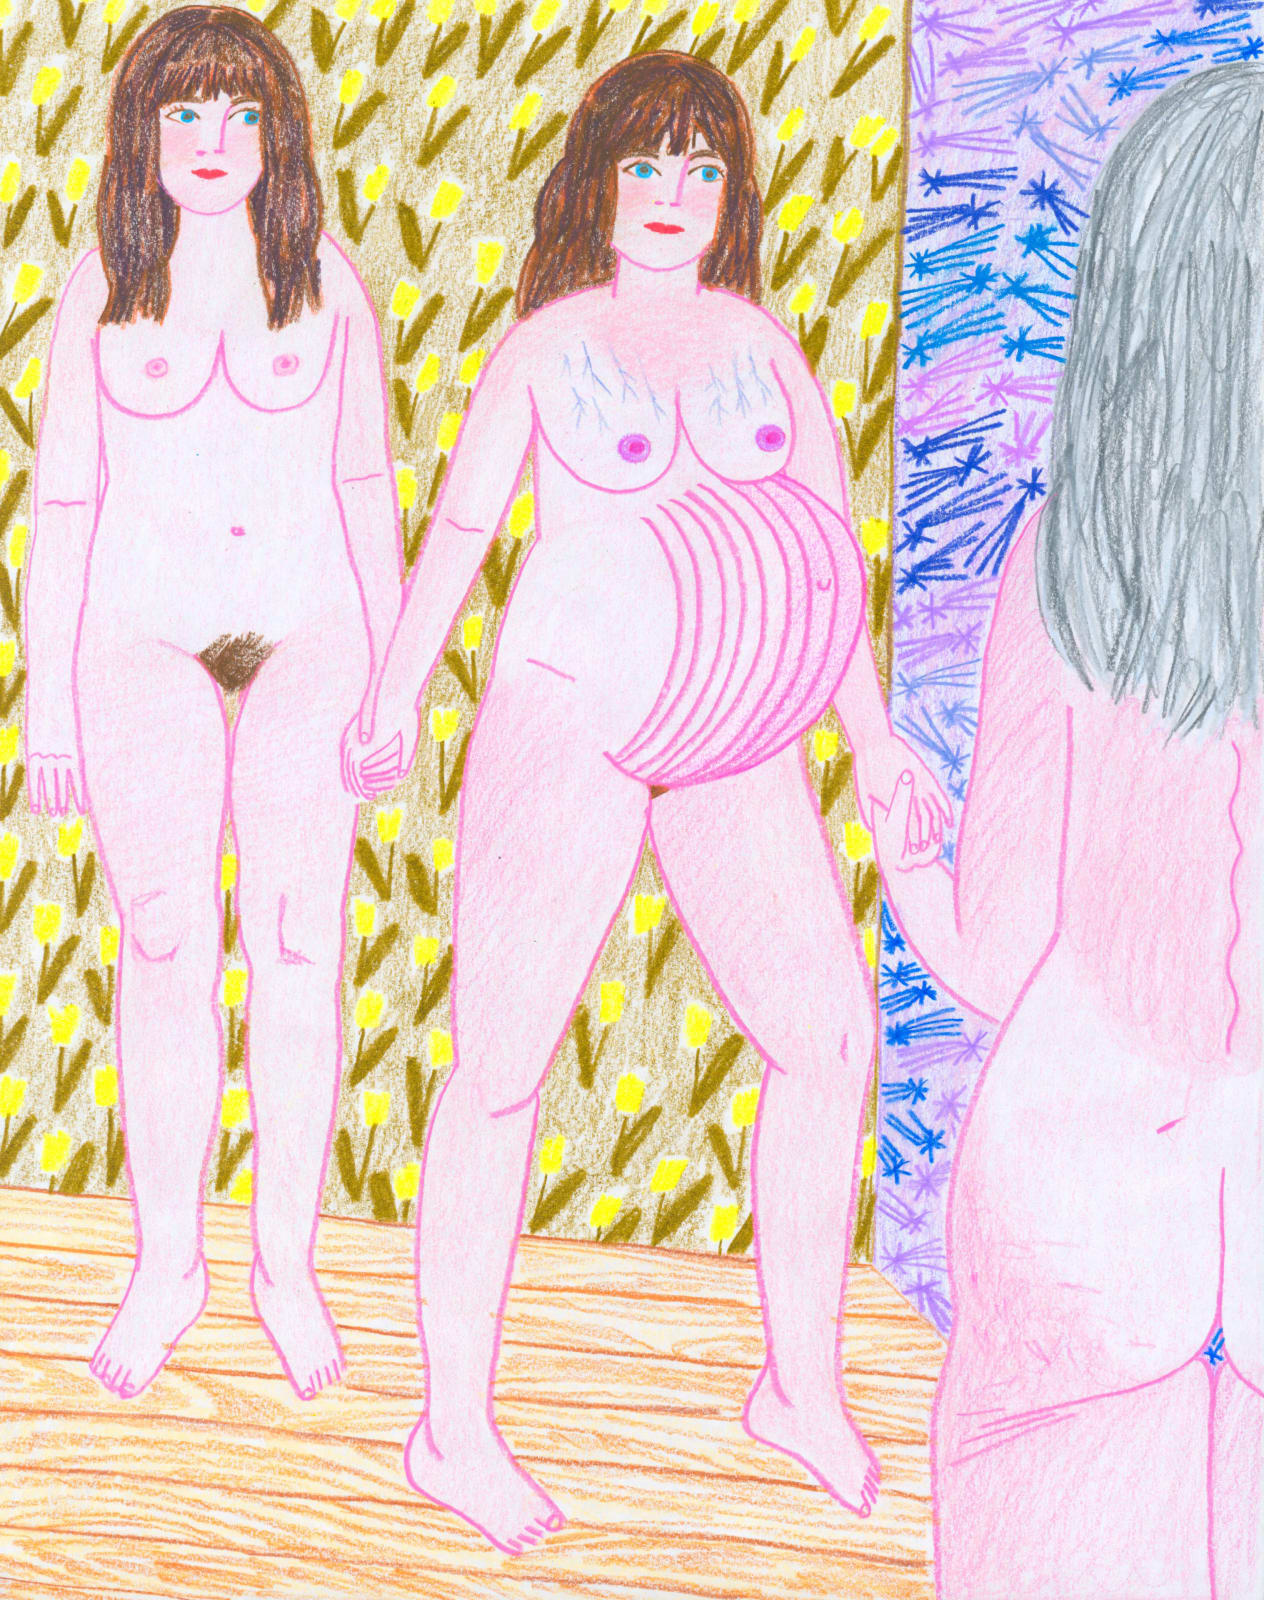 Drawing of the artist represented as three naked women of different ages from young to old, all holding hands and facing different directions in a patterned room. The woman in the middle is pregnant with stretch marks on her stomach and breasts holding hands with the other two facing forward and the other from behind. 